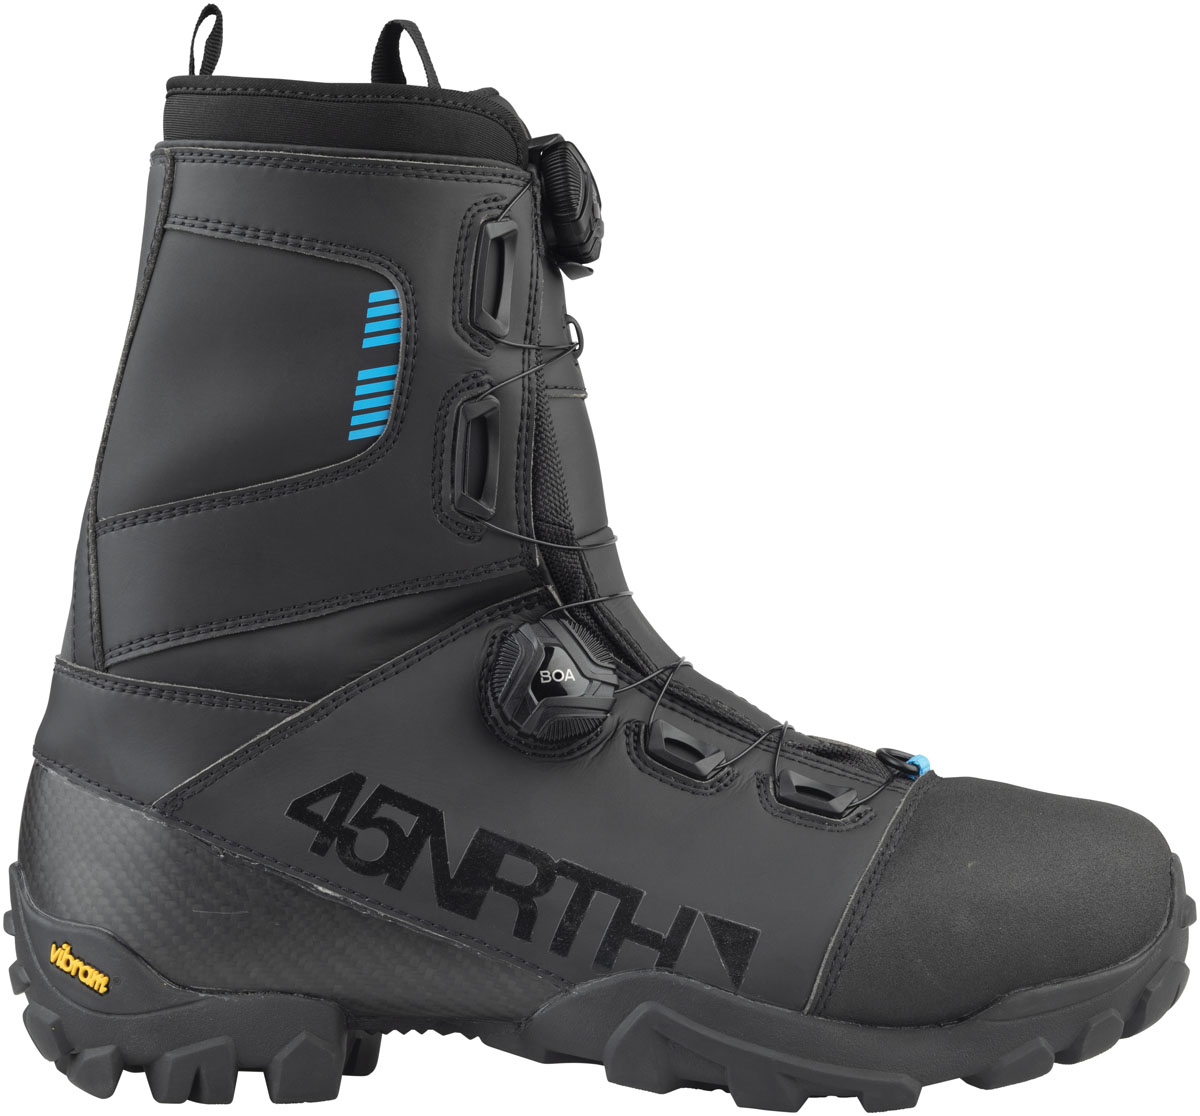 45NRTH Wölvhammer completely redesigned w/ 2 boots in 1, Wølfgar winter riding boot adds Boa